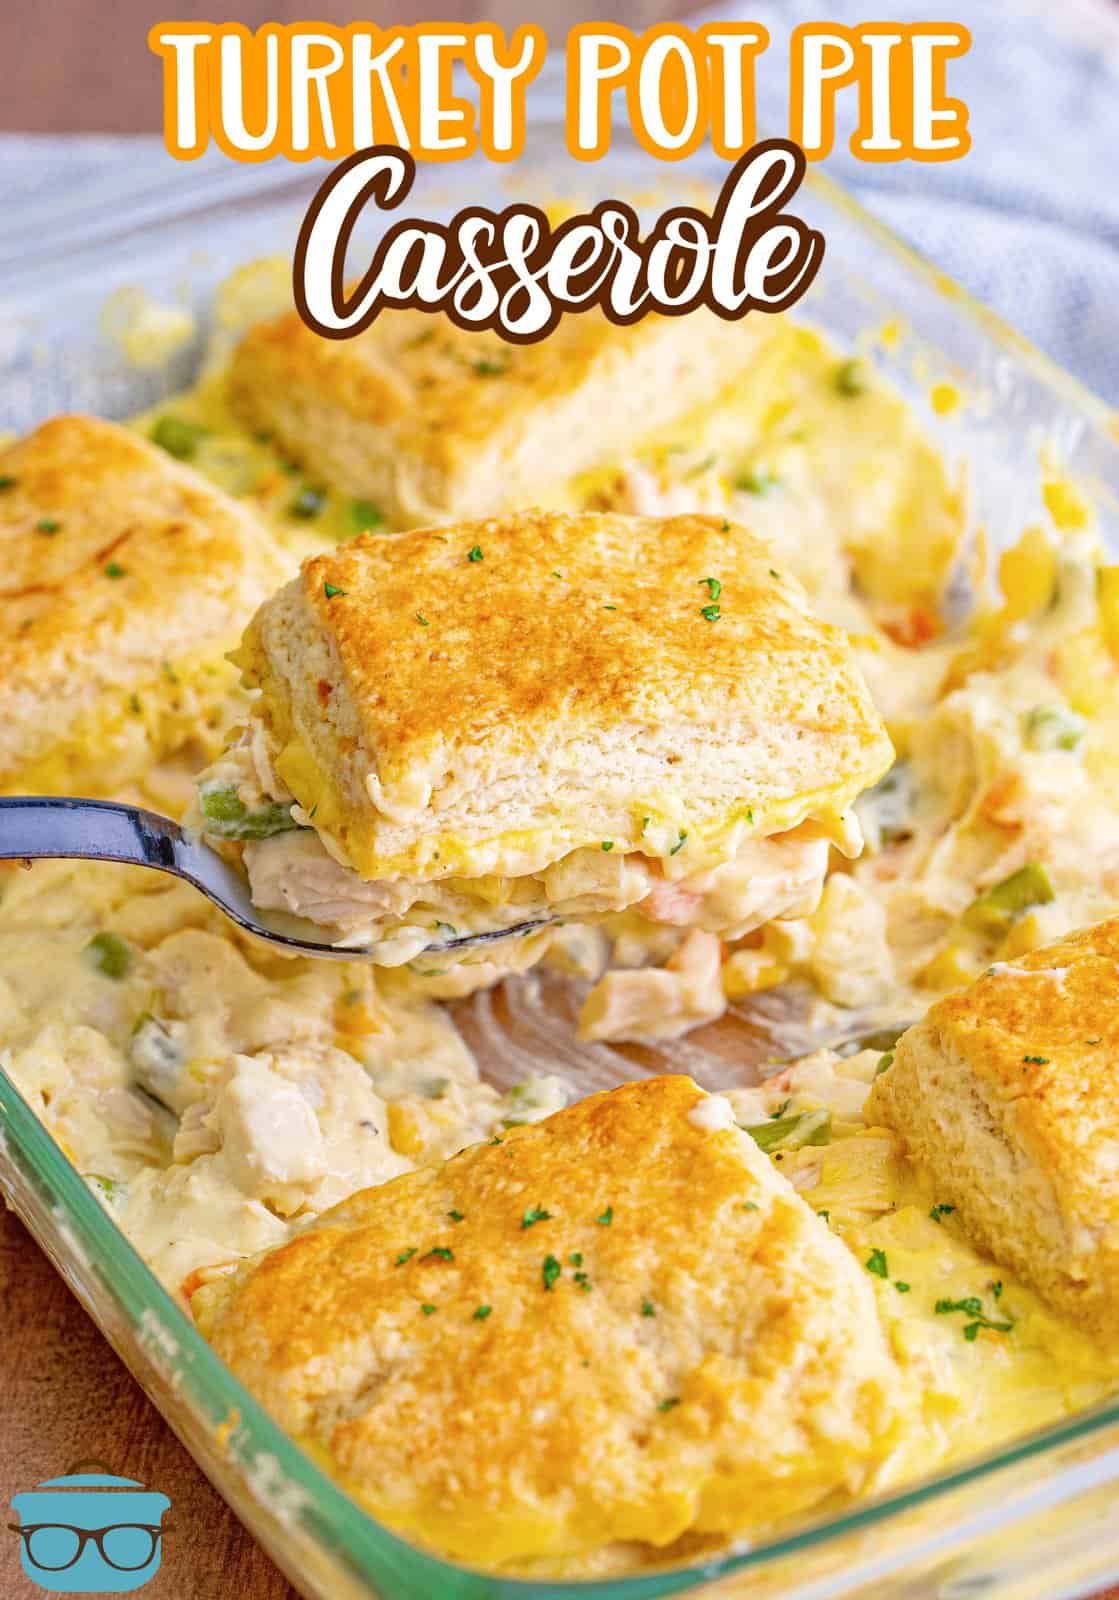 Pinterest image of serving spoon scooping out some of the Turkey Pot Pie Casserole from baking dish.